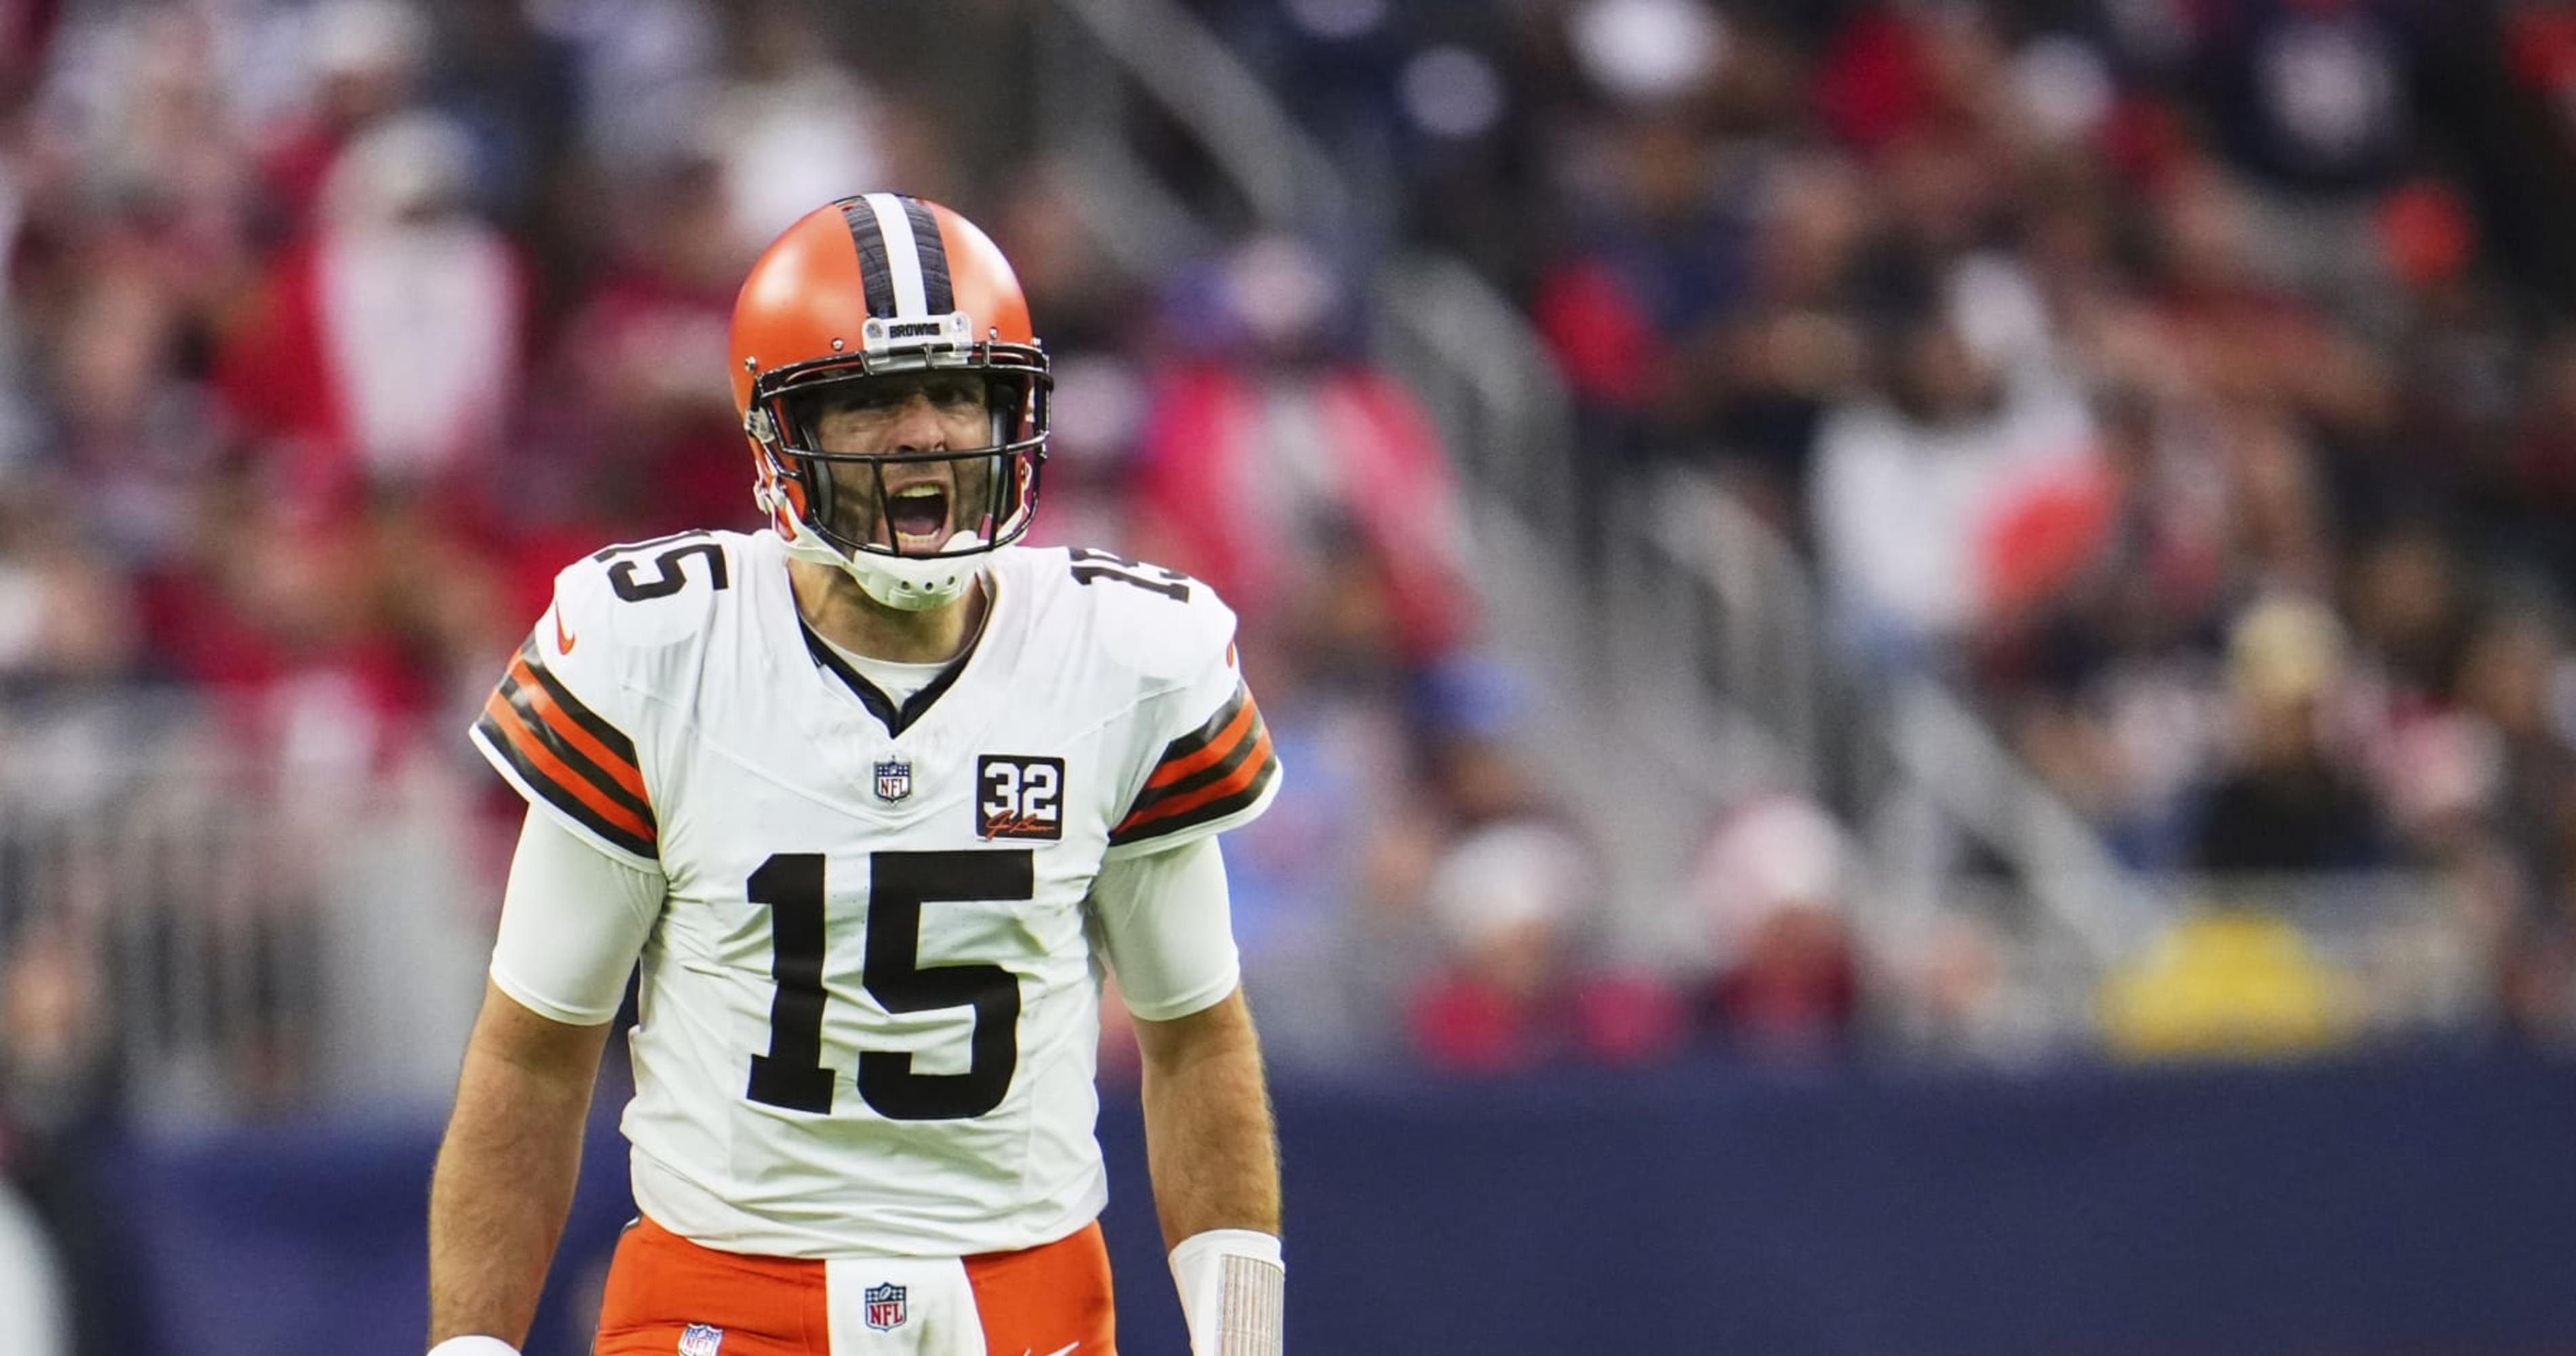 Browns' Joe Flacco on Matchup with Jets After Exit 'I'm Happy to Be